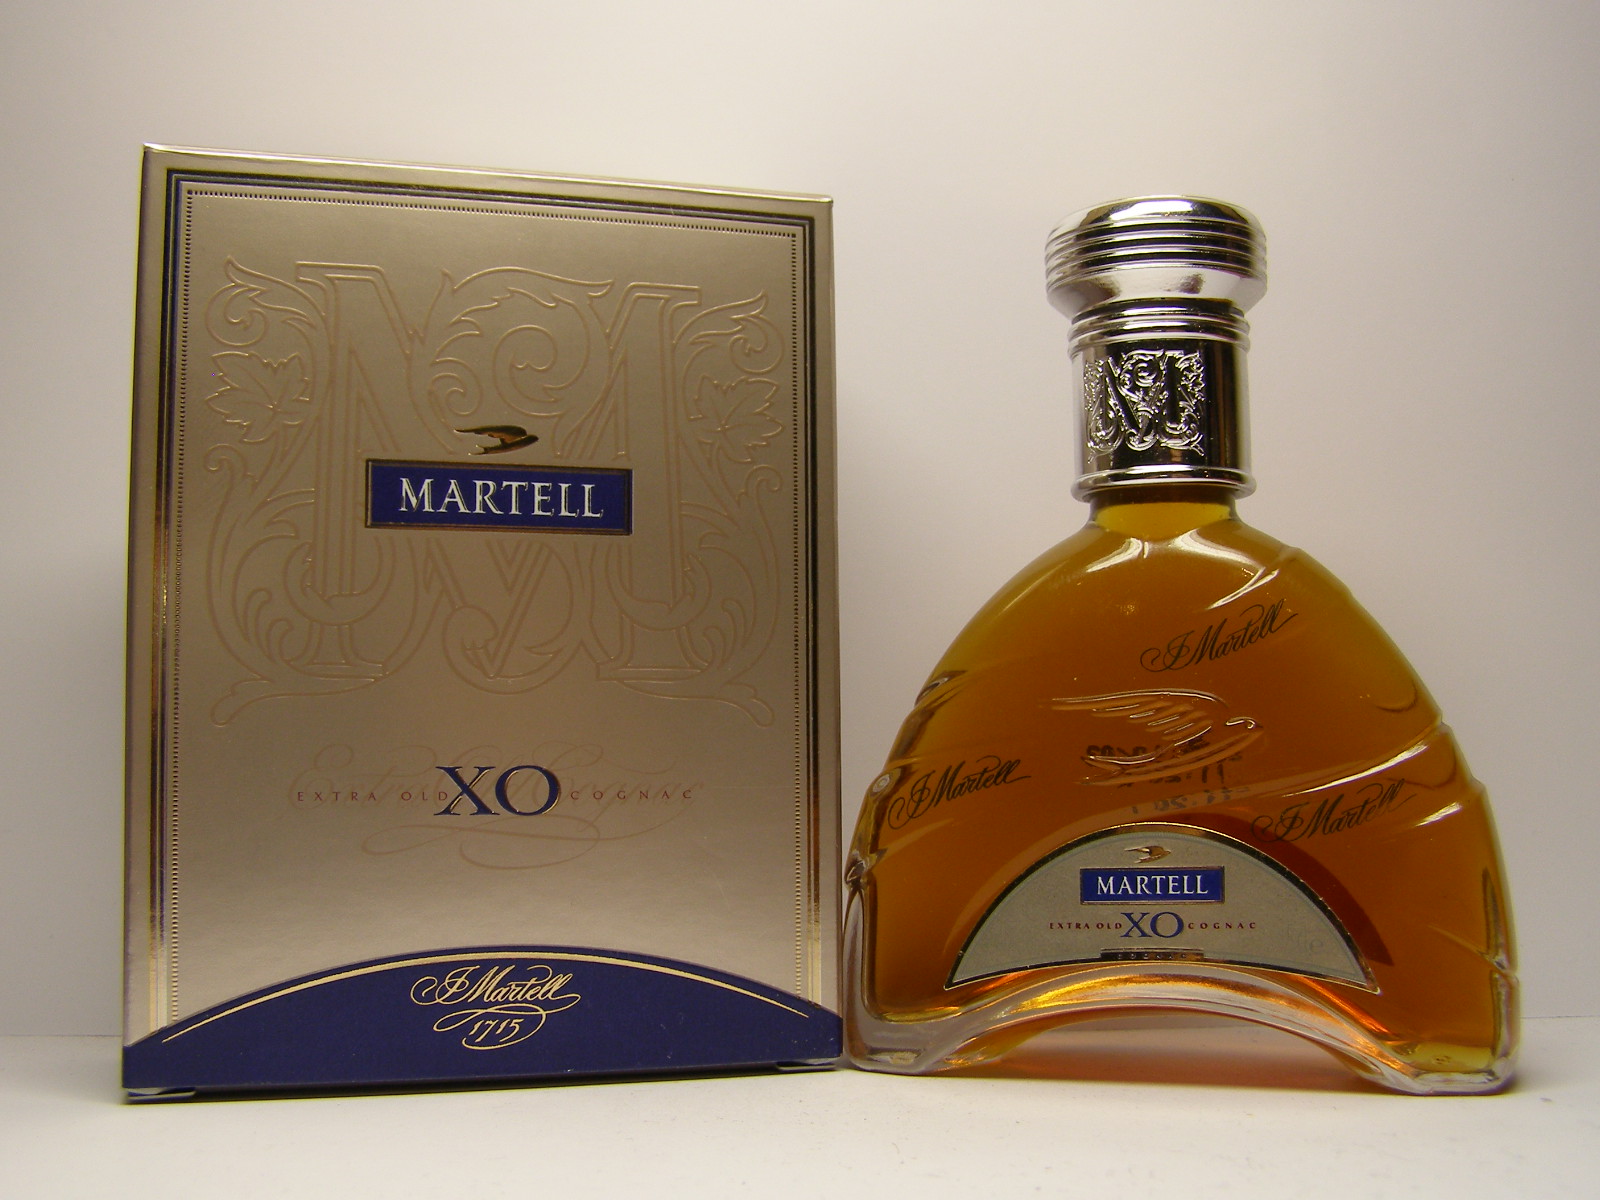 Martell Extra old Хо